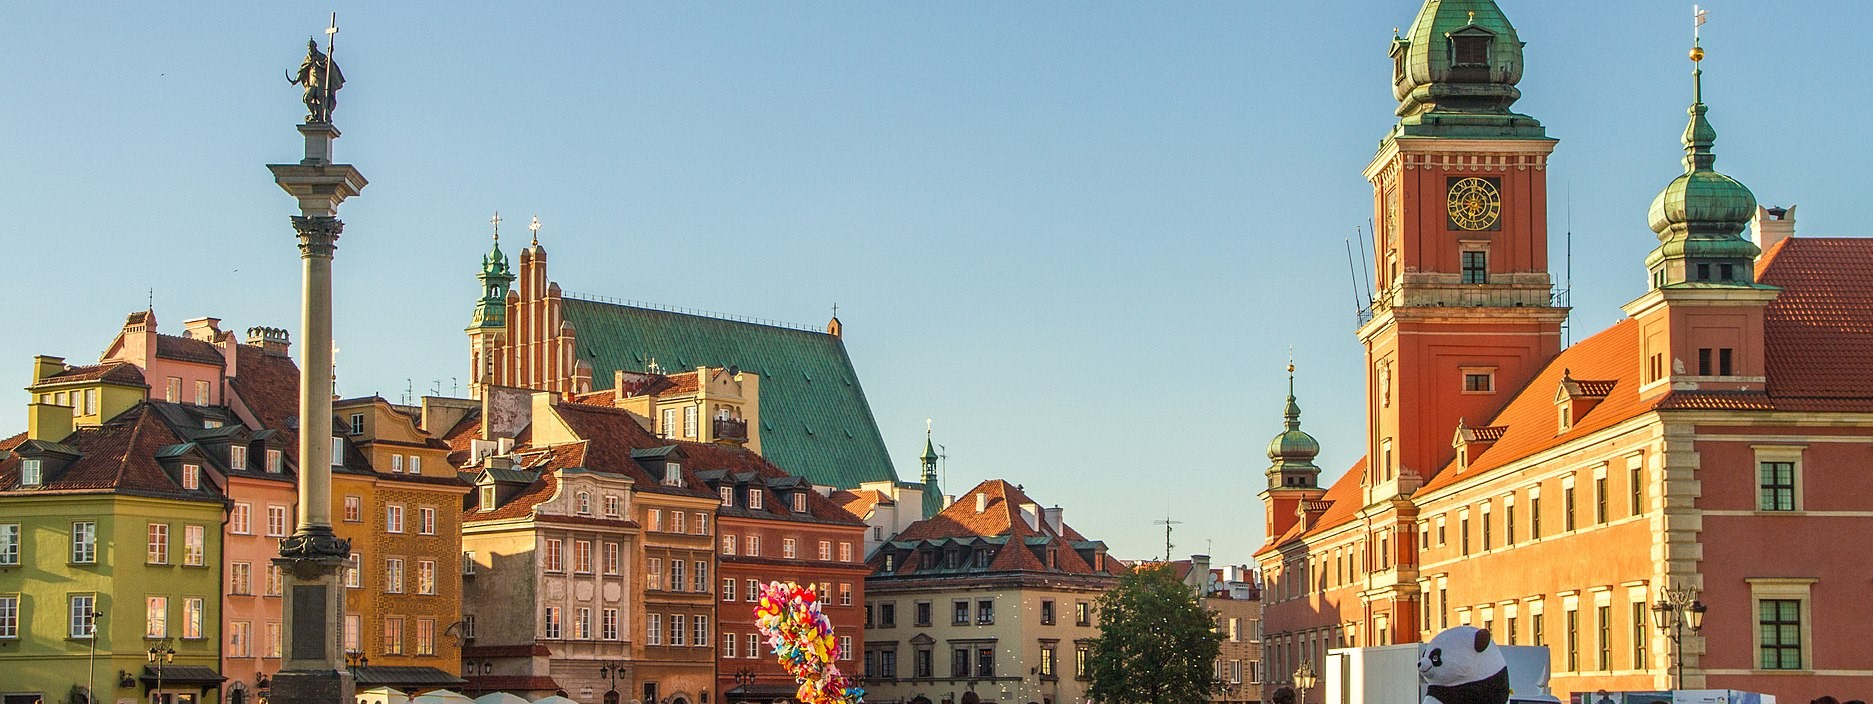 Management Training Courses in Warsaw, Poland, Europe